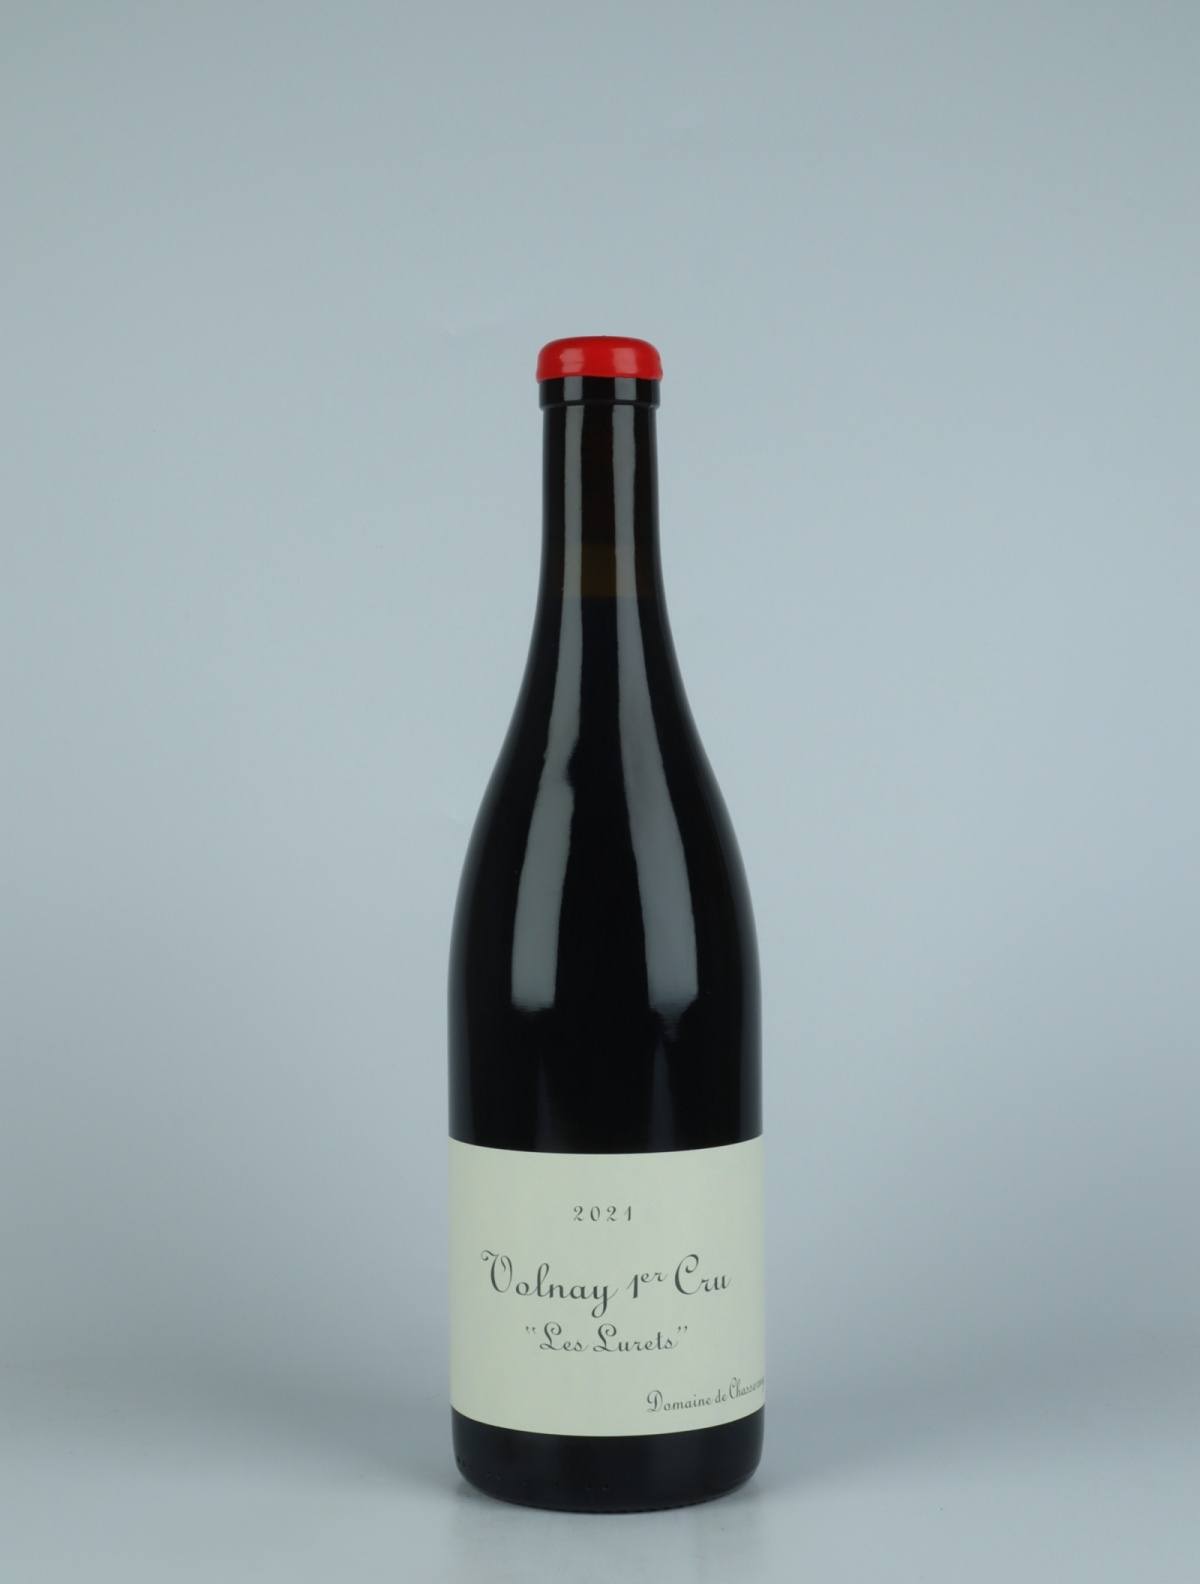 A bottle 2021 Volnay 1. Cru - Les Lurets Red wine from Domaine de Chassorney, Burgundy in France